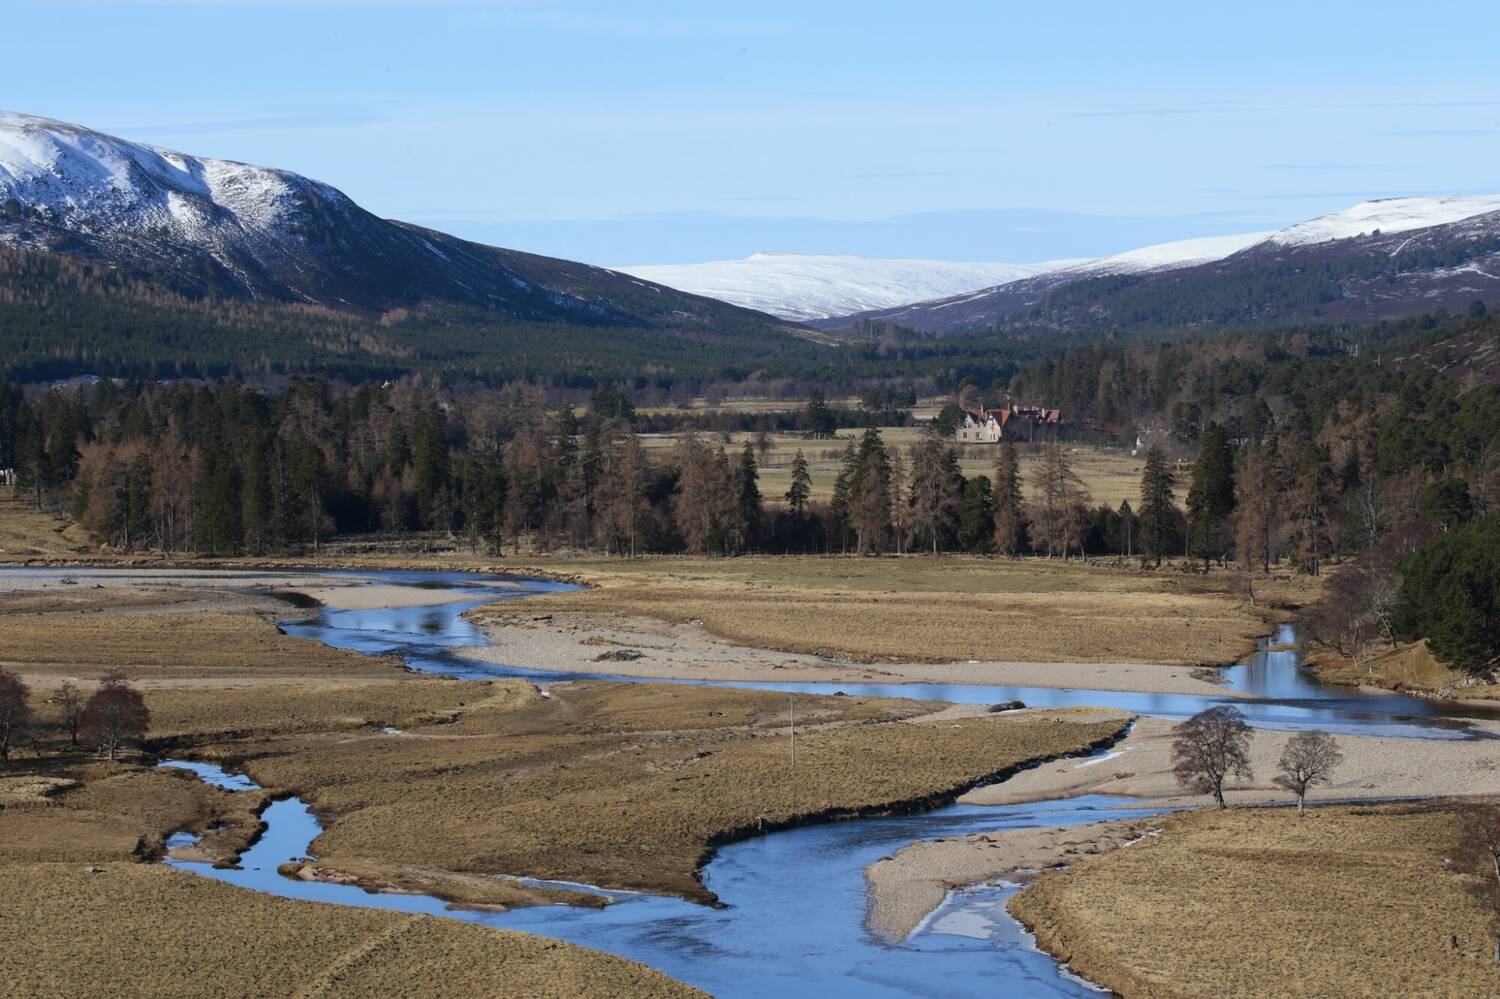 A river meanders through a valley with snow-capped mountains in the background under a blue sky.